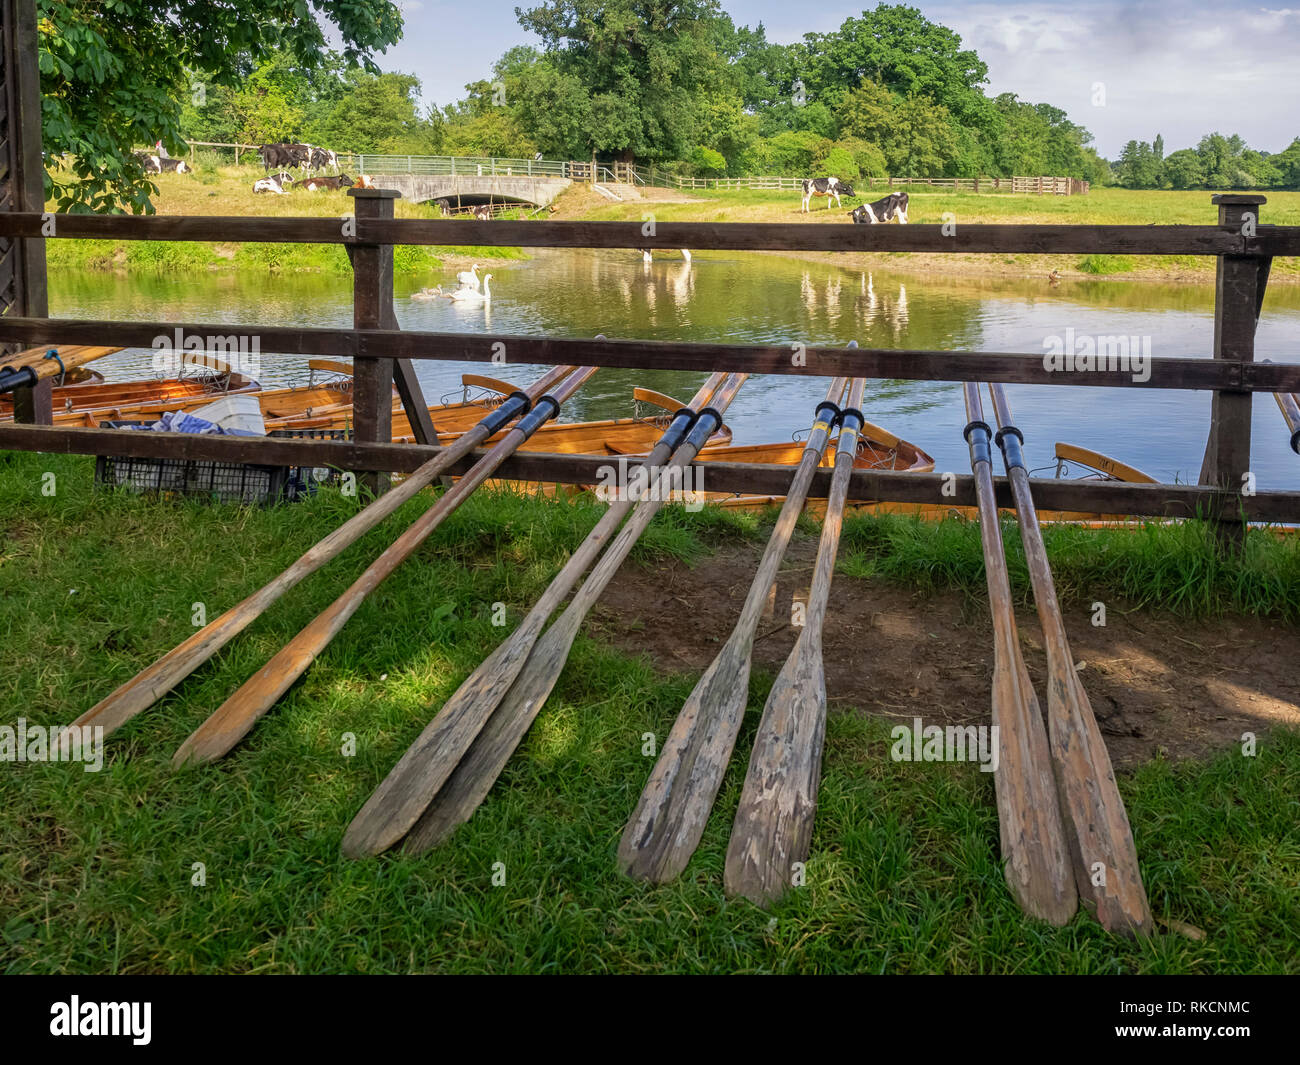 DEDHAM, ESSEX, UK - JUNE 13, 2018:  Rowing boat oars on the banks of the River Stour Stock Photo